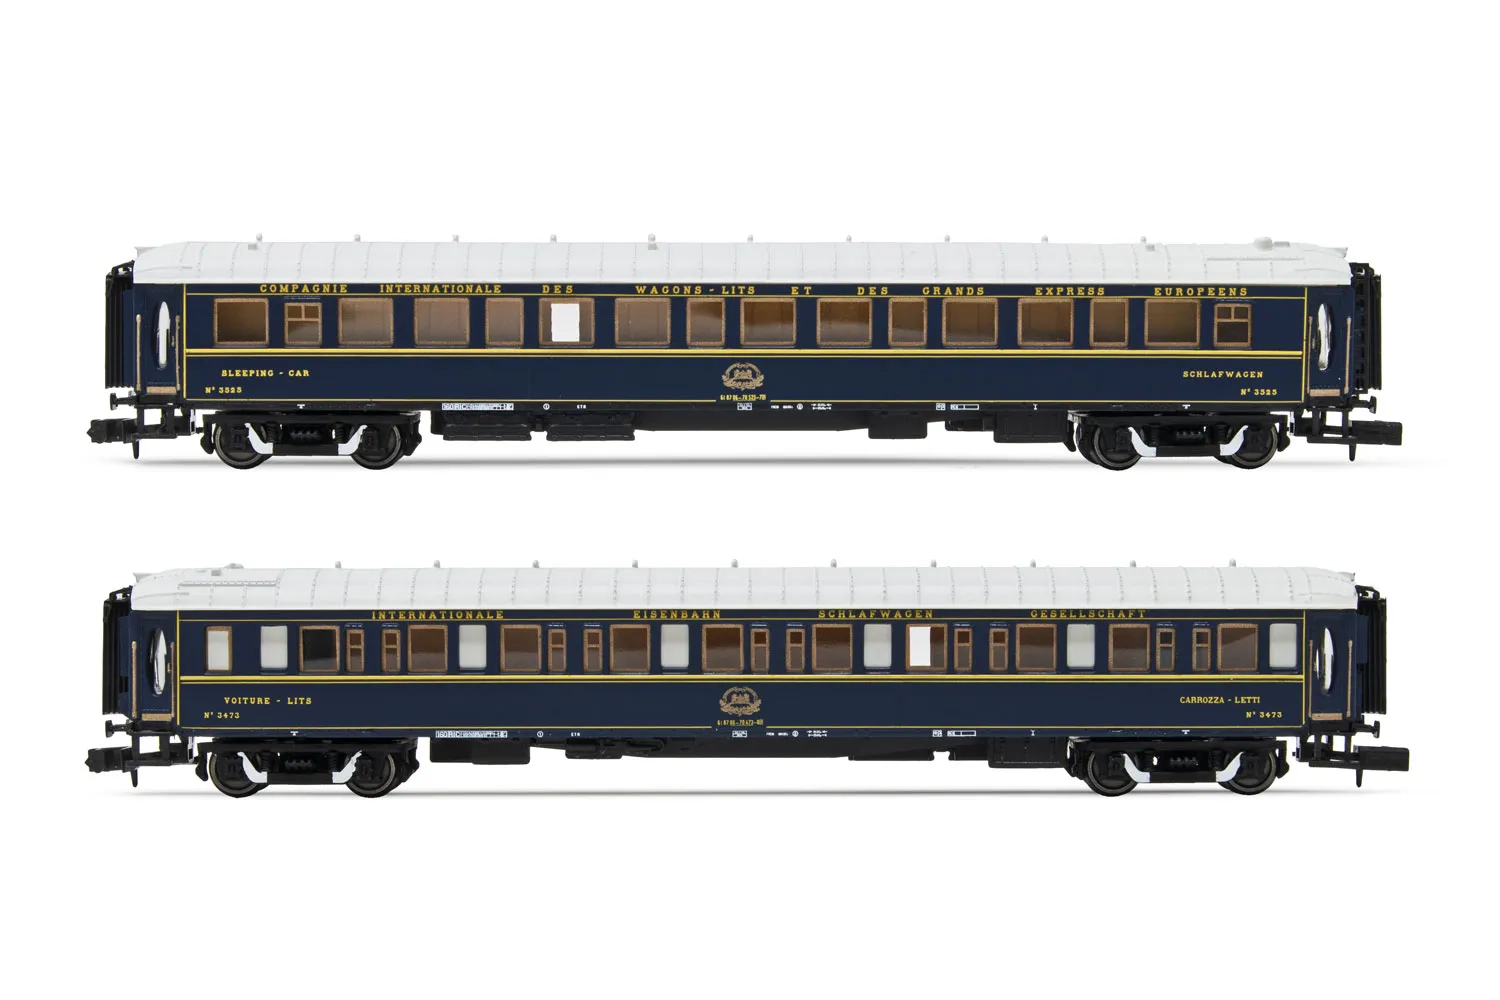 VSOE, 2-unit pack "Pullmancoaches", sleeping coaches, blue livery, period IV-V